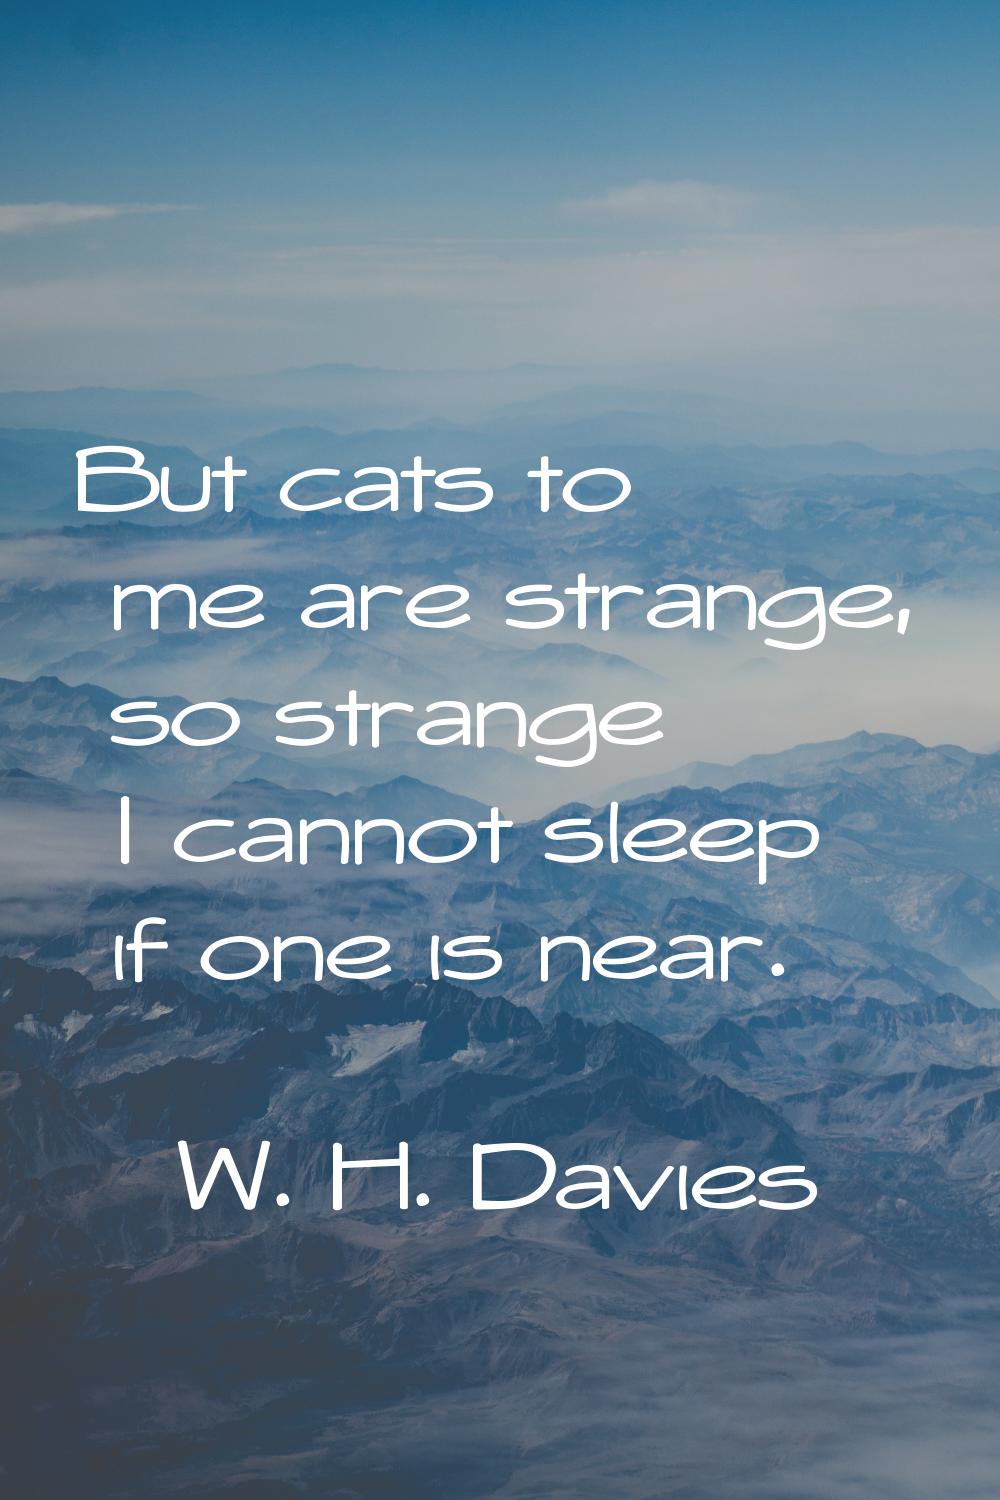 But cats to me are strange, so strange I cannot sleep if one is near.